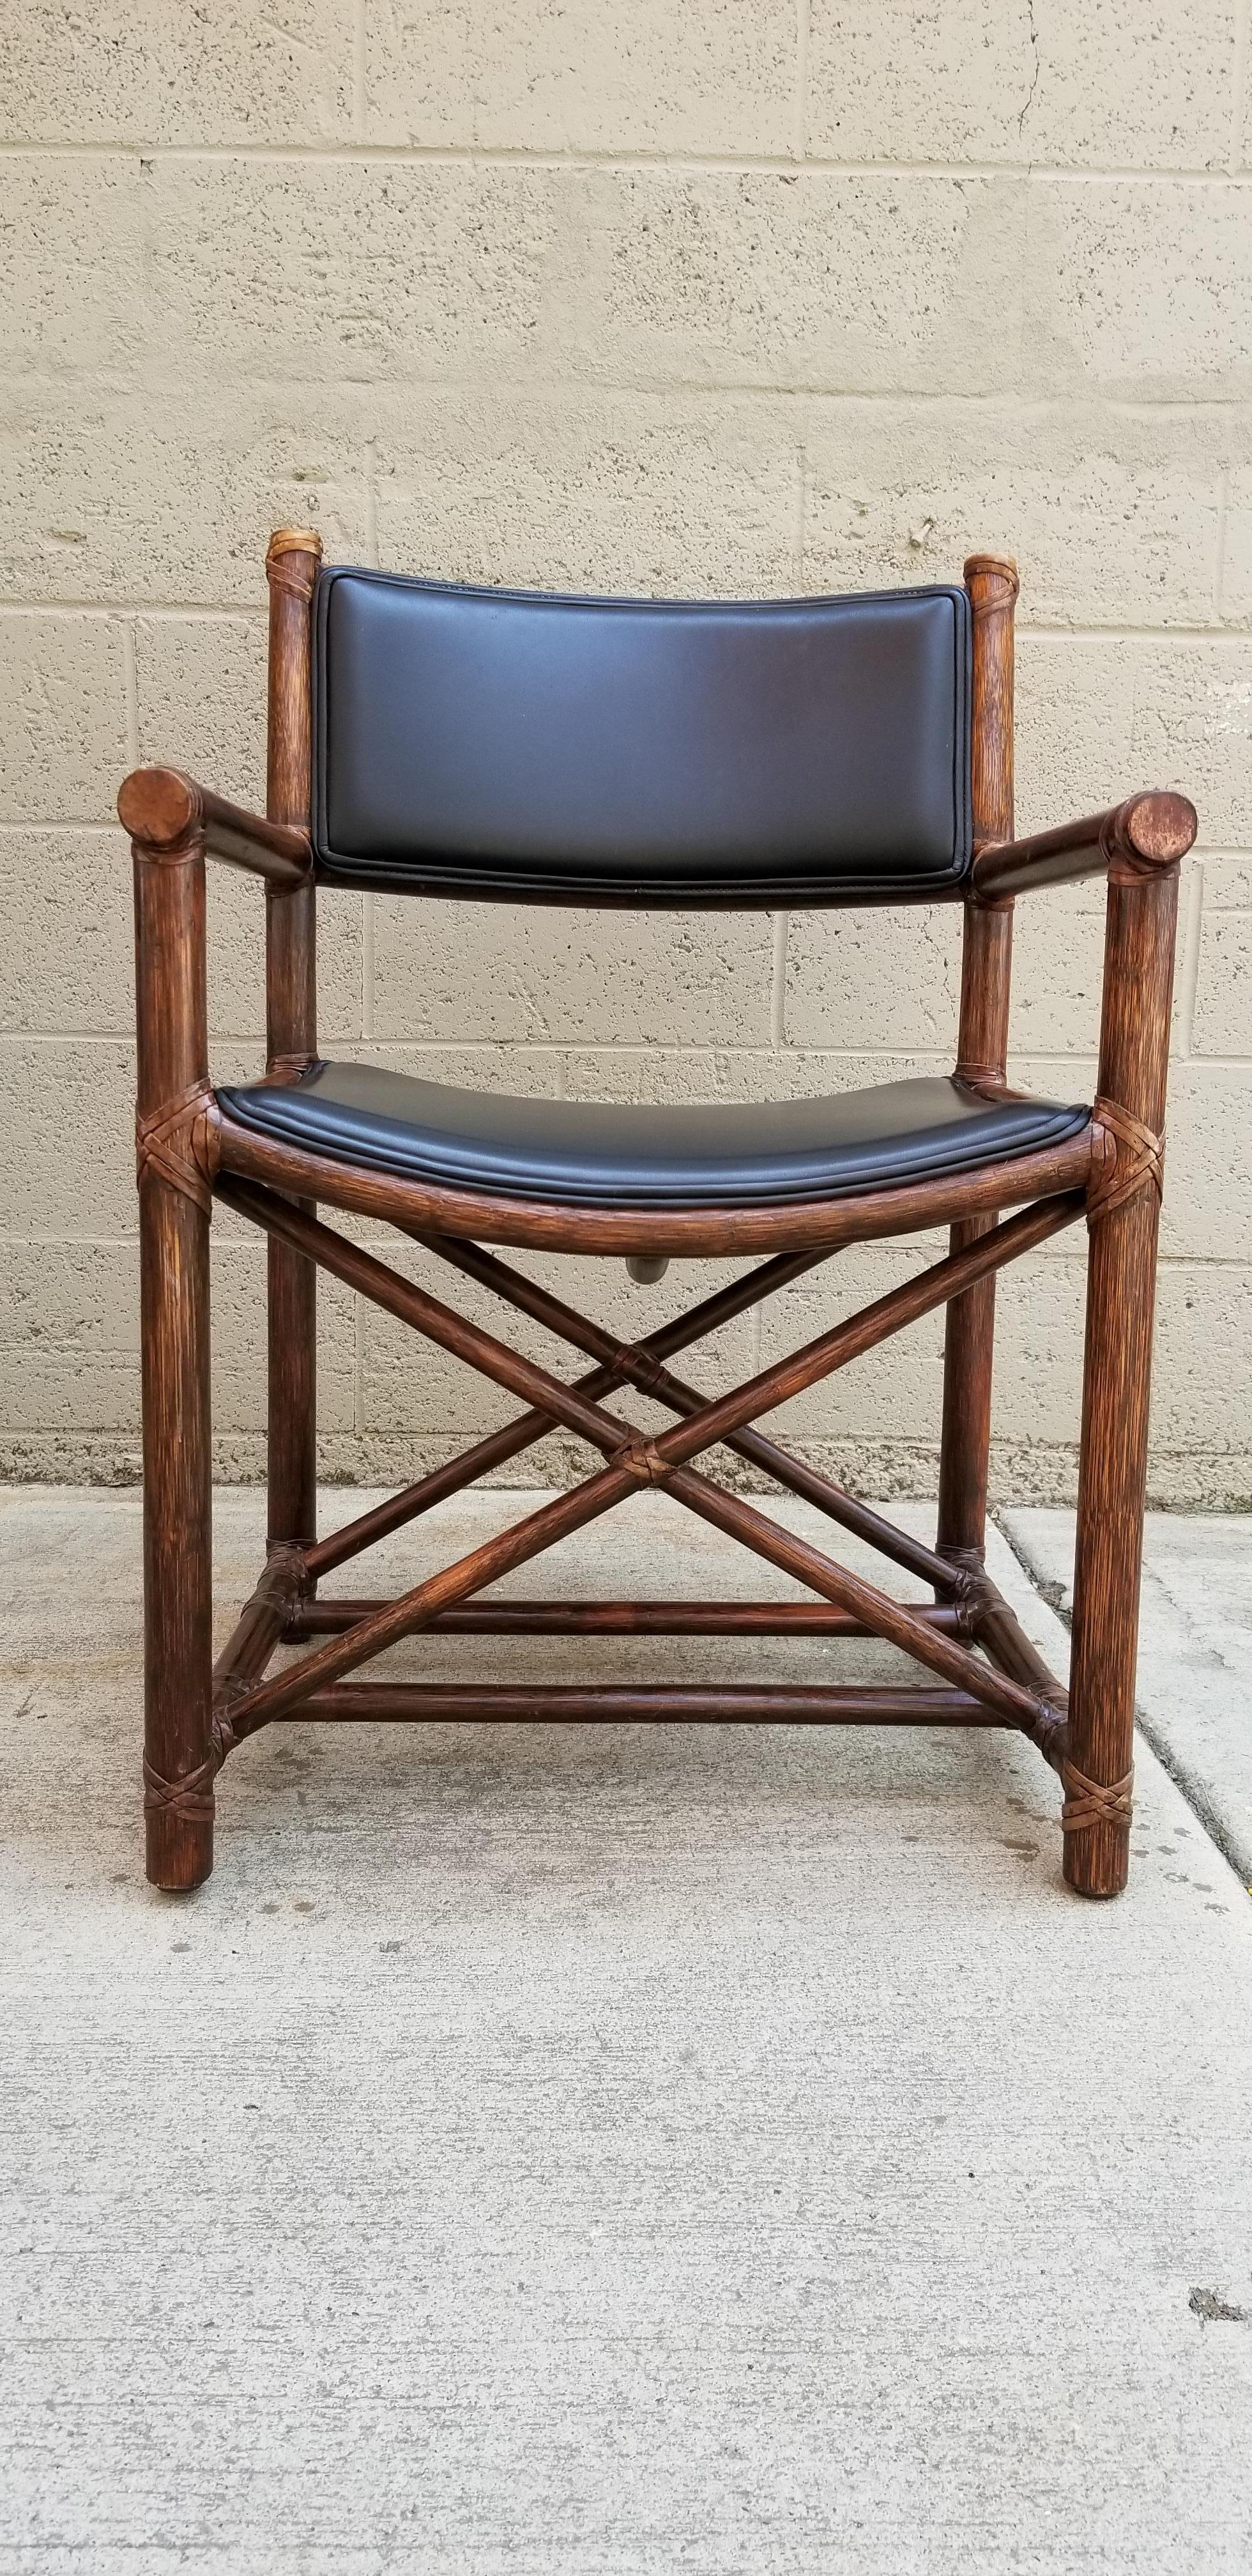 A set of eight bamboo or rattan armchairs with black leather seats and backrest. Quality craftsmanship throughout with all leather bindings intact. Arm height 25.5